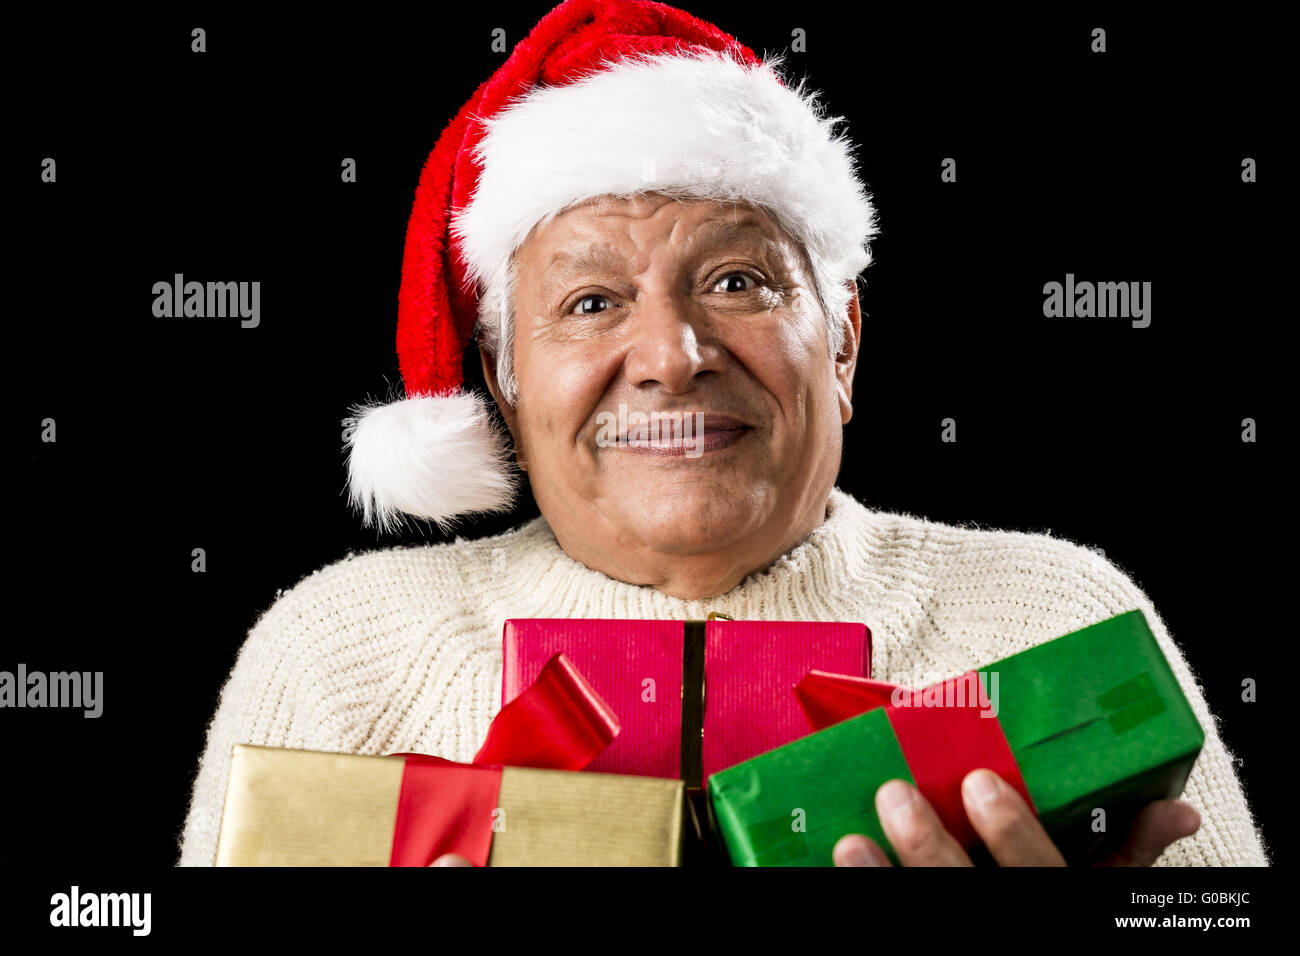 Puzzled Old Gentleman Carrying Three Wrapped Gifts Stock Photo